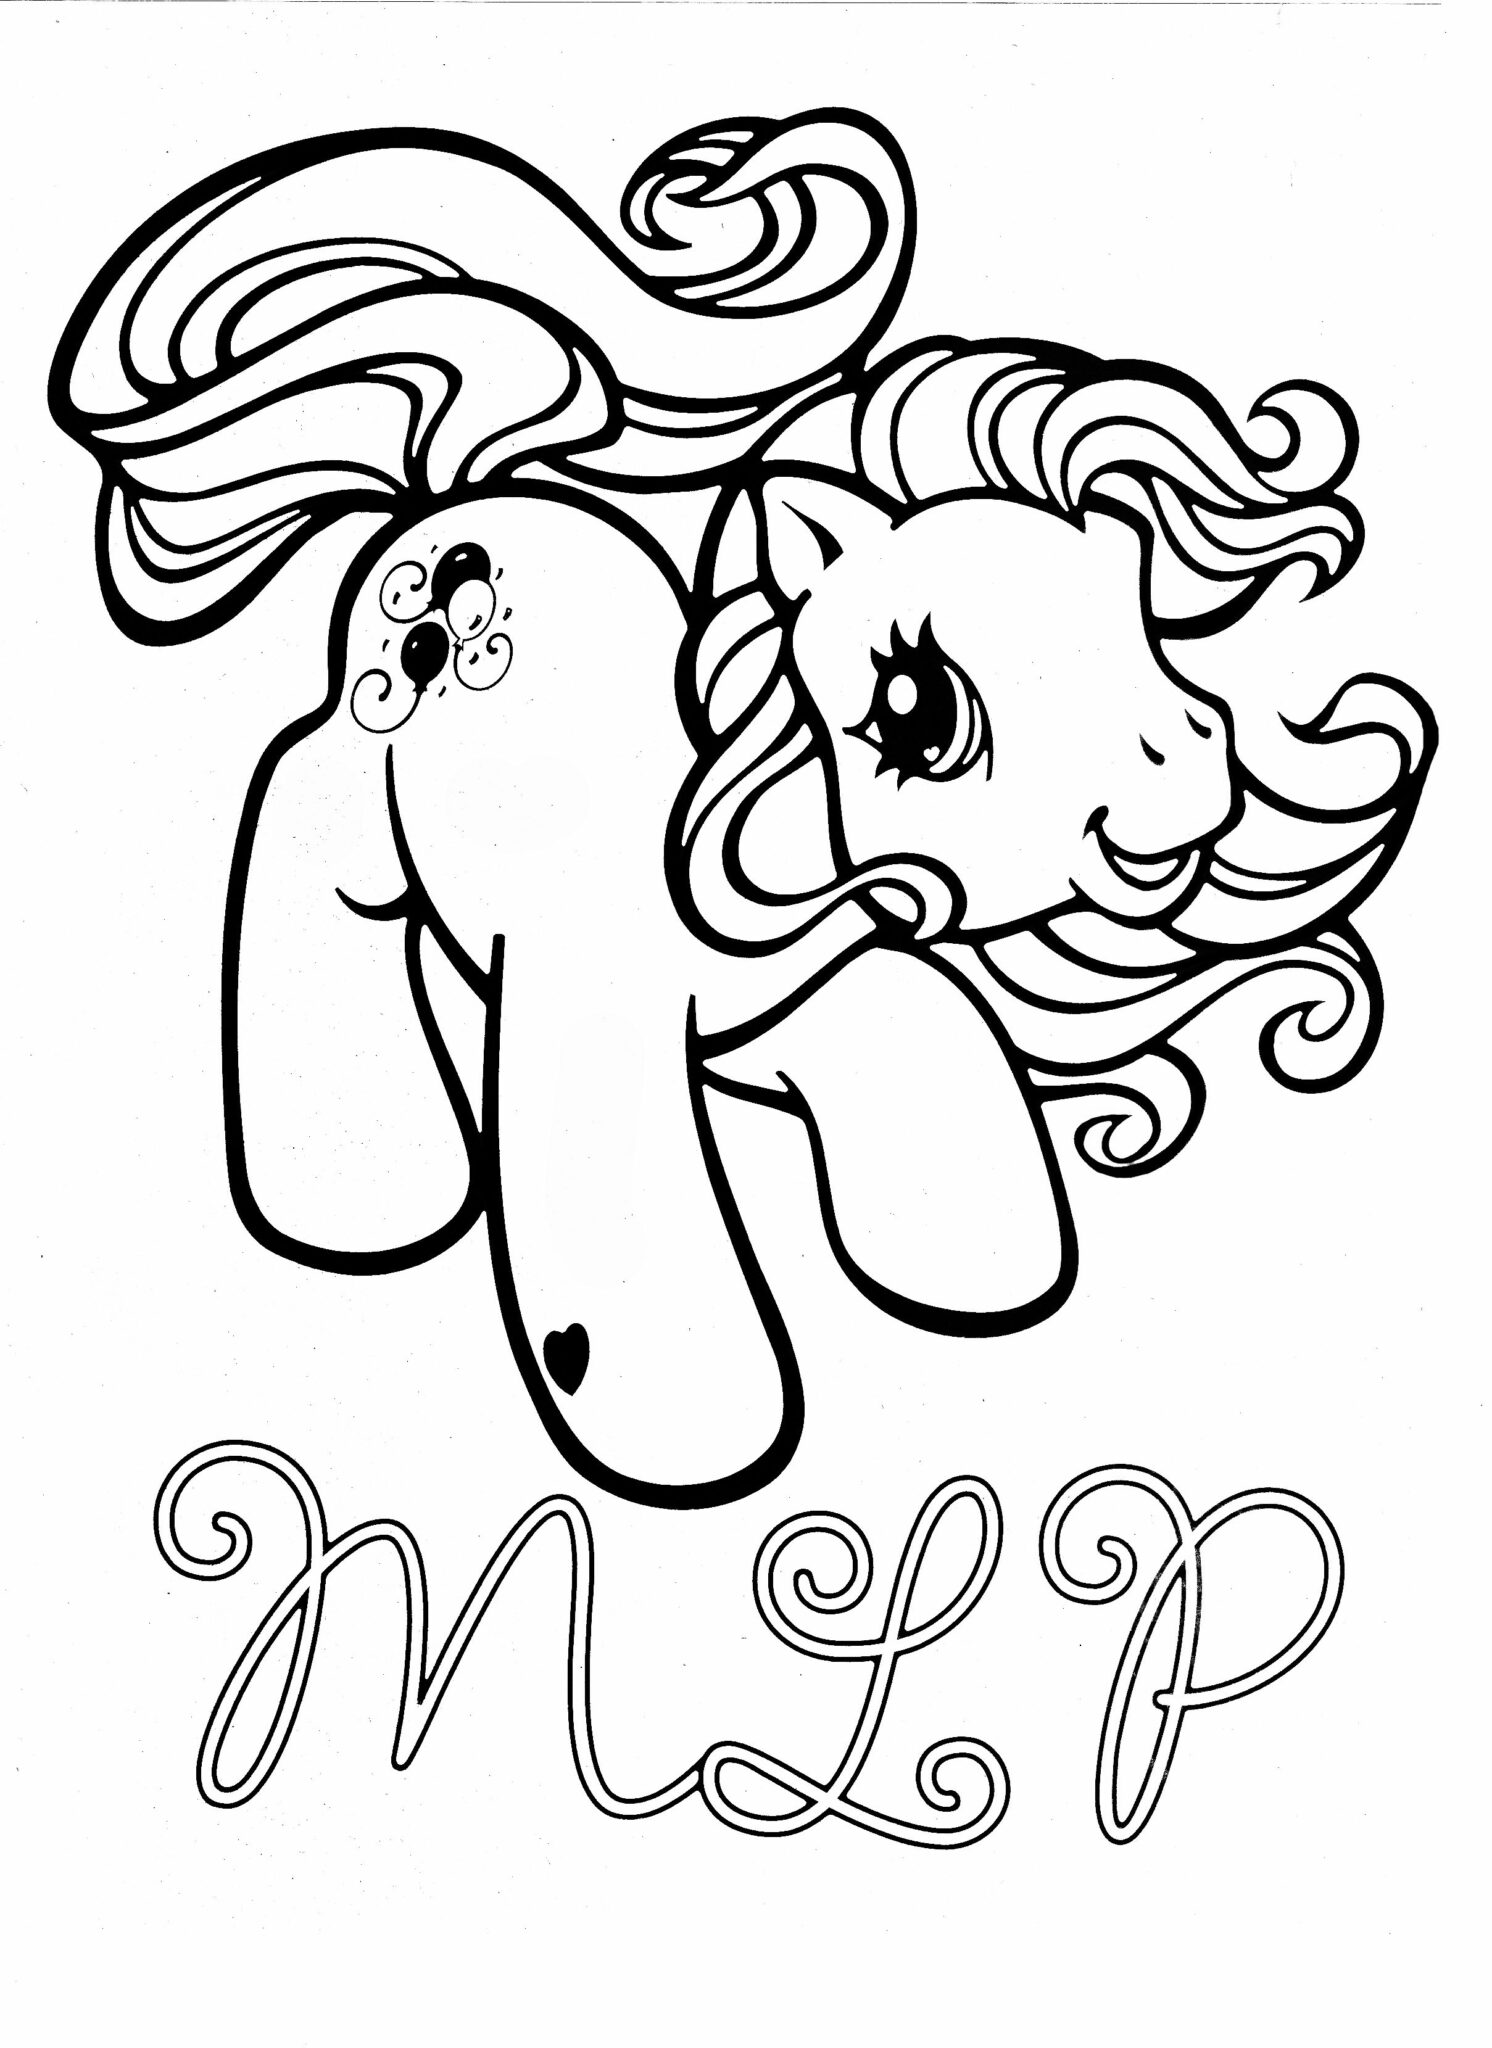 Funny Pinkie Pie Coloring Pages Pdf To Print - Coloringfolder.com